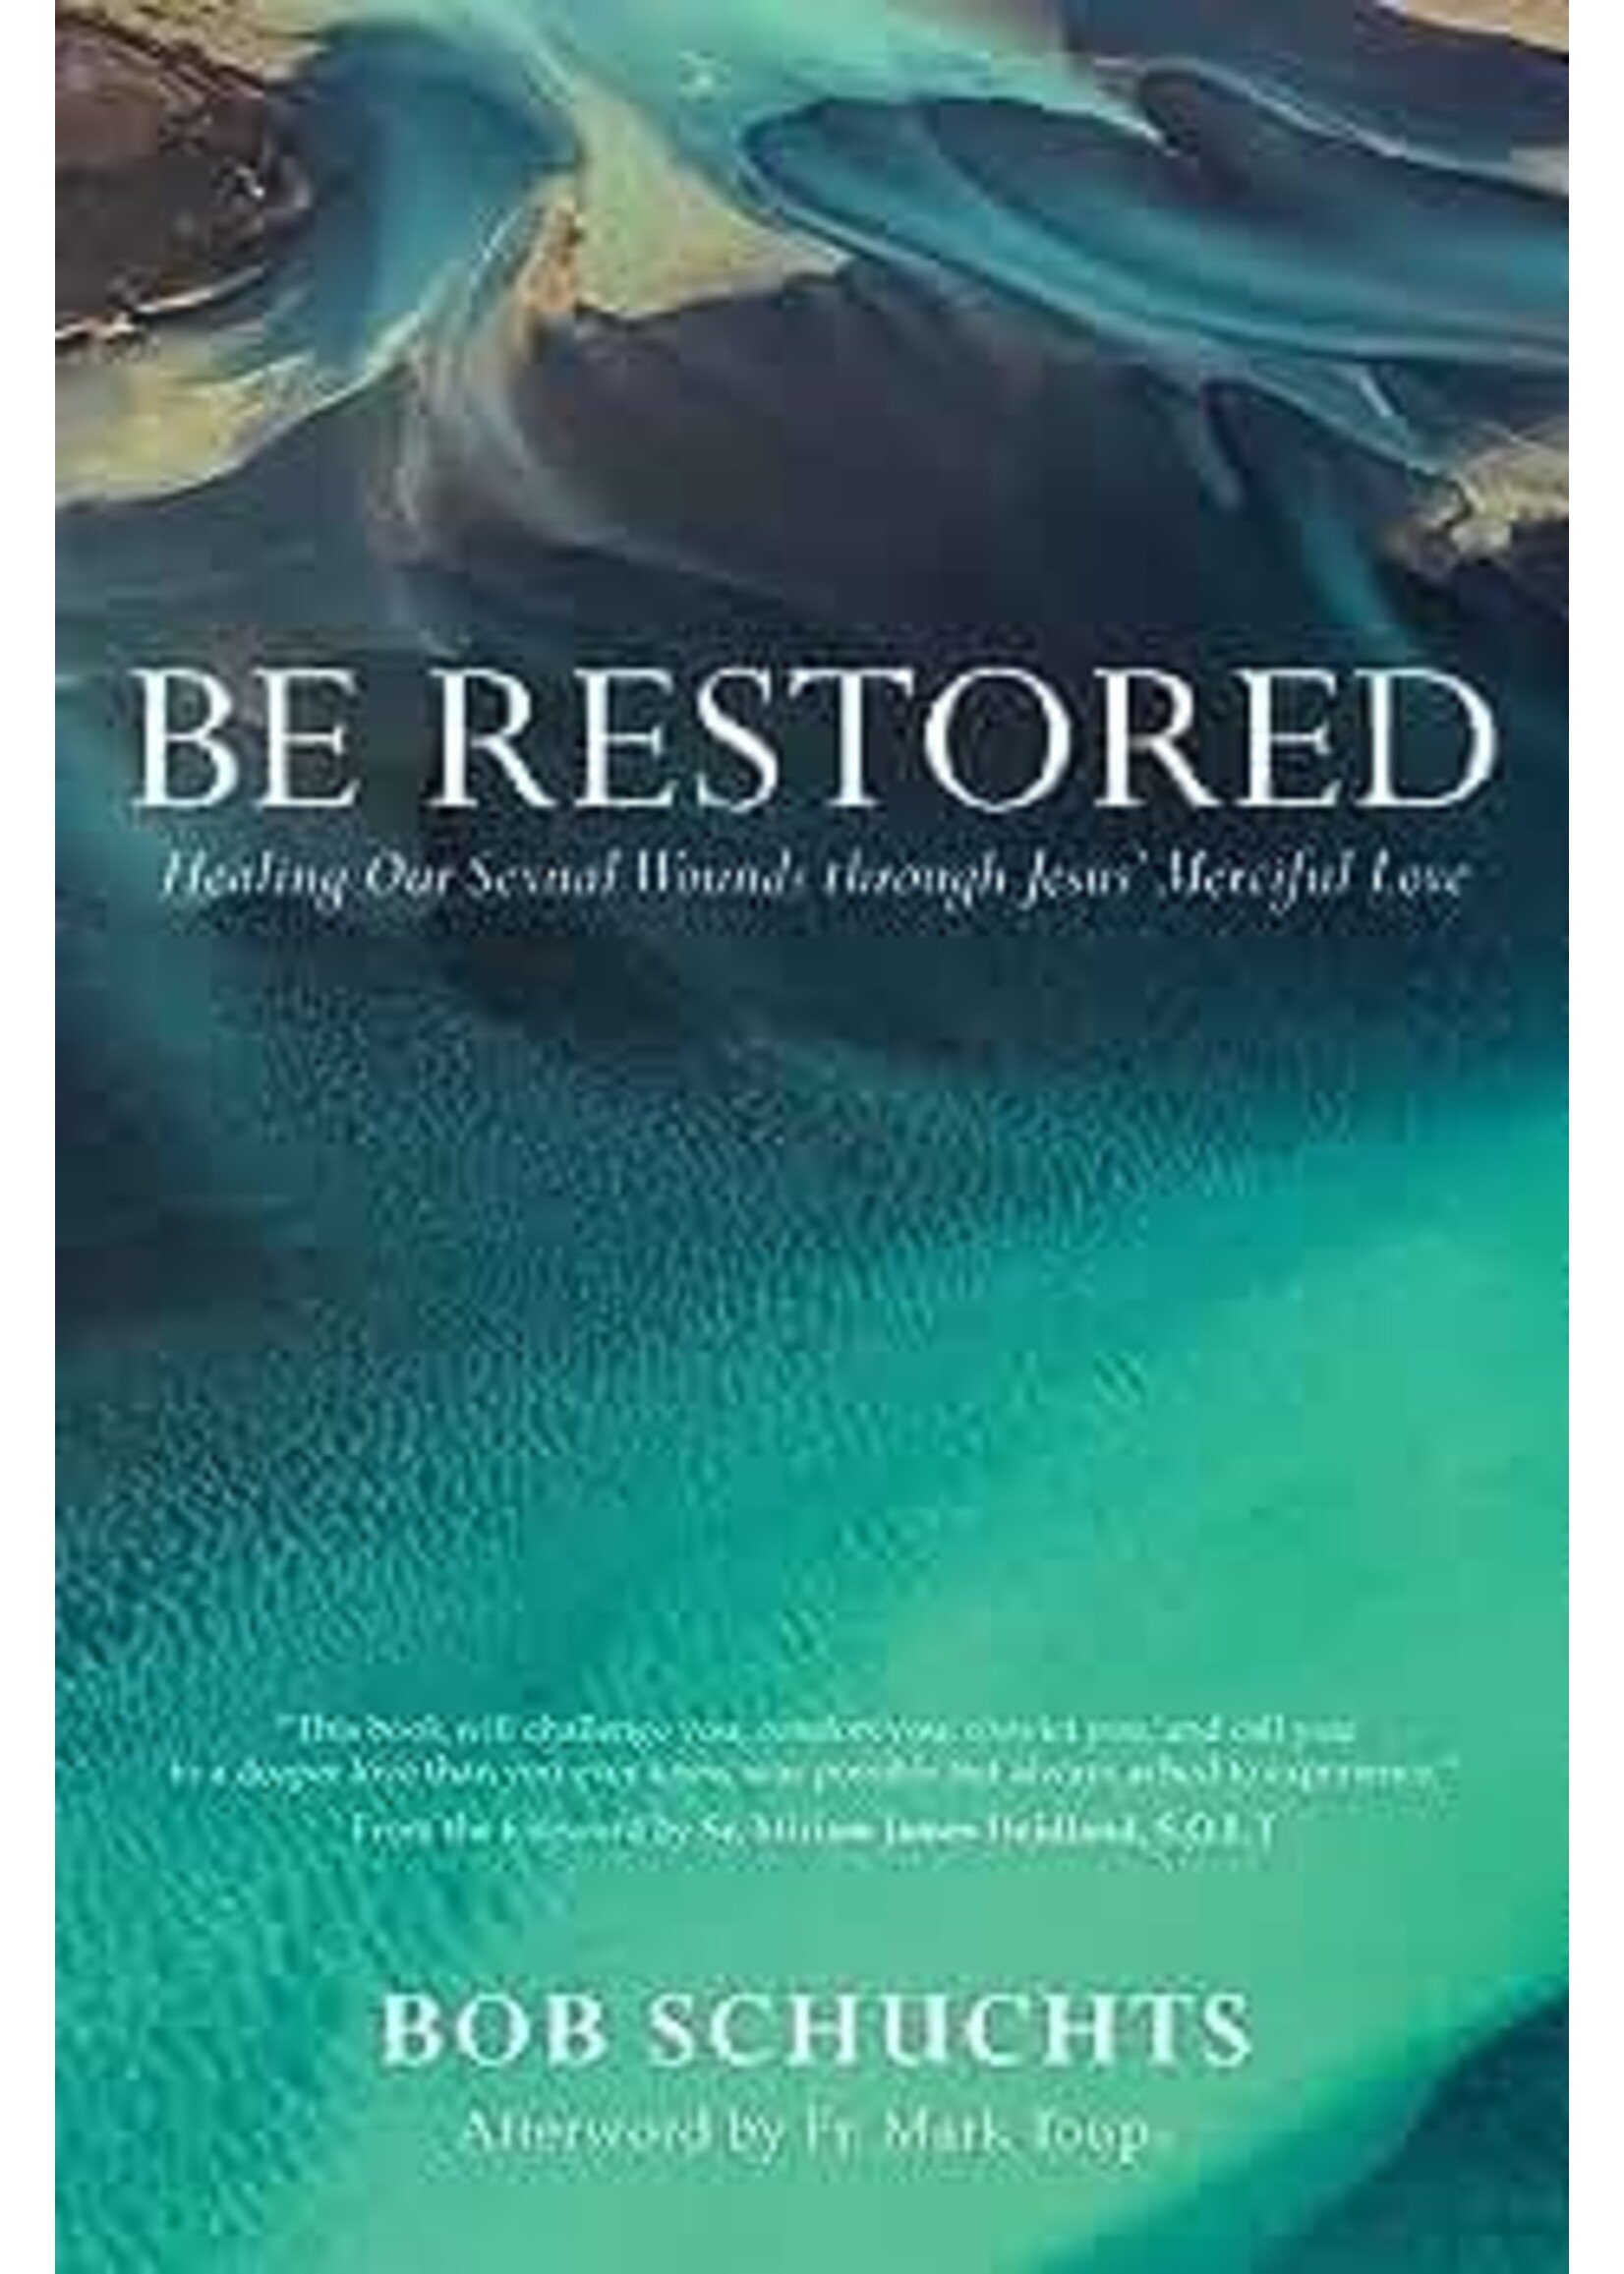 Be Restored: Healing Our Sexual Wounds through Jesus’ Merciful Love